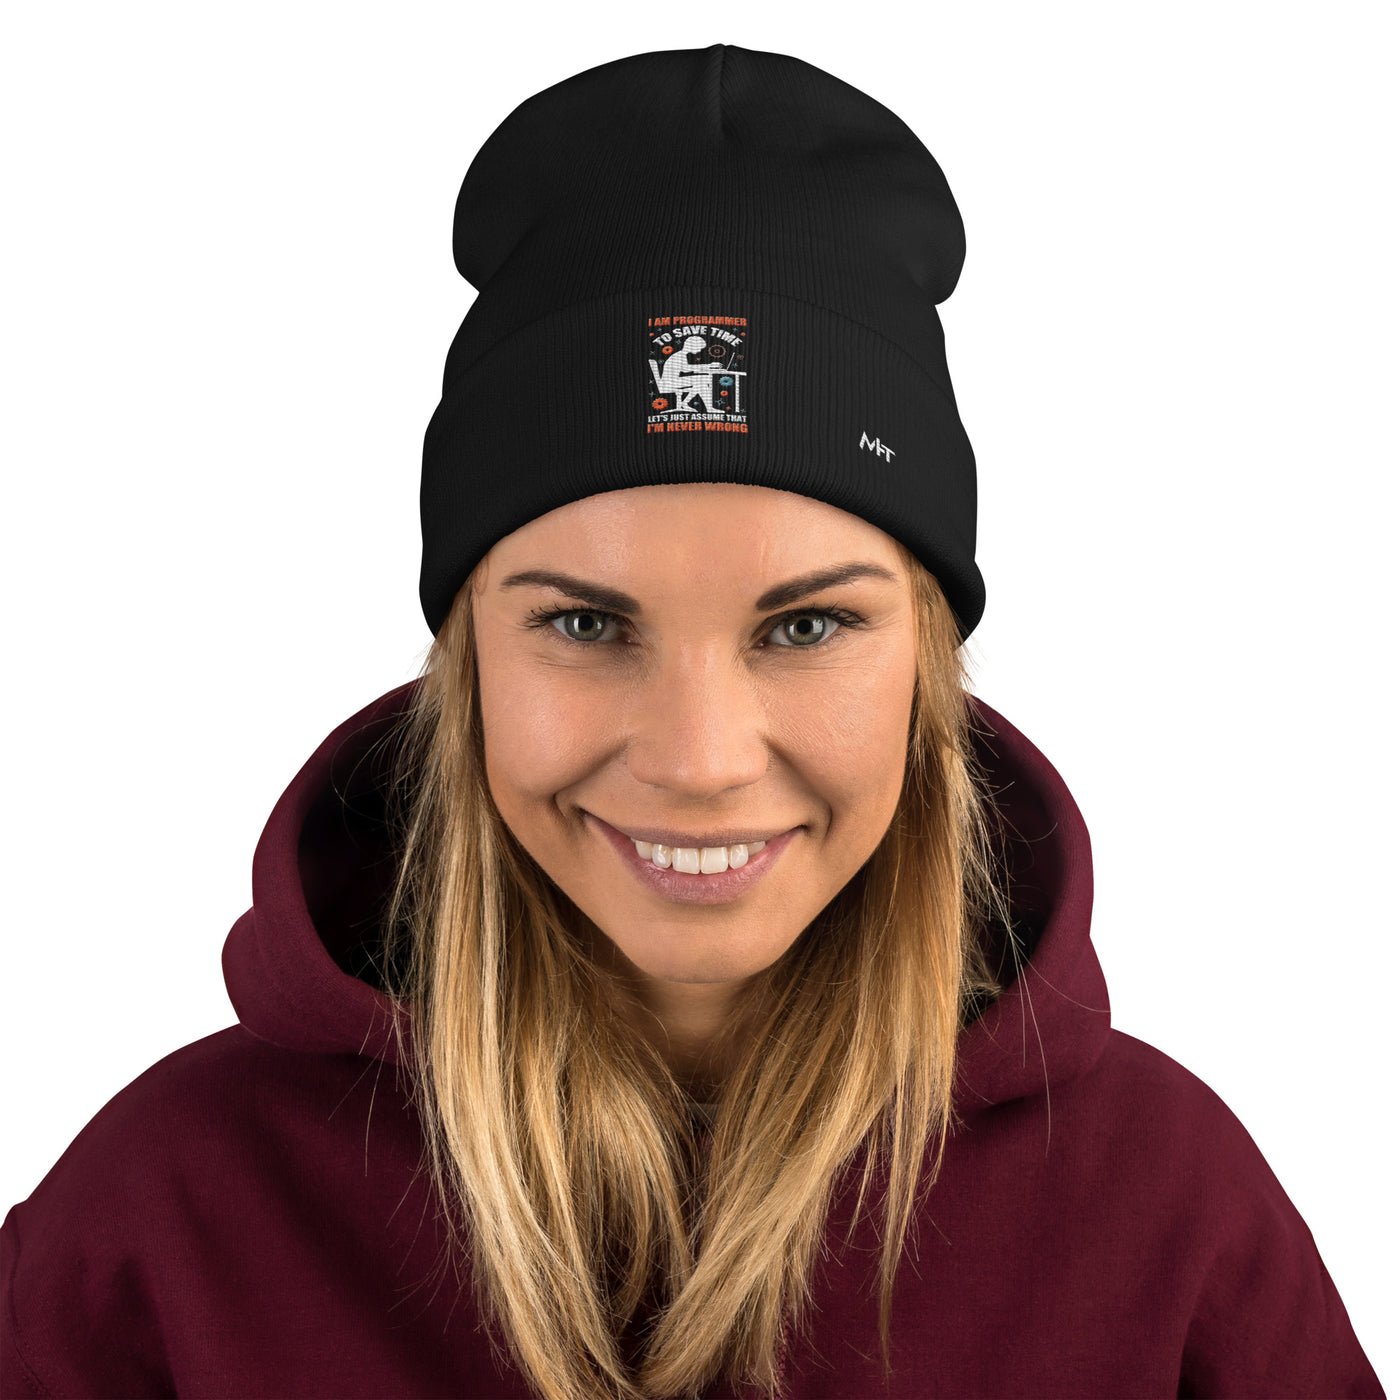 I am Programmer, to Save time, let's just Assume; I am never Wrong - Embroidered Beanie